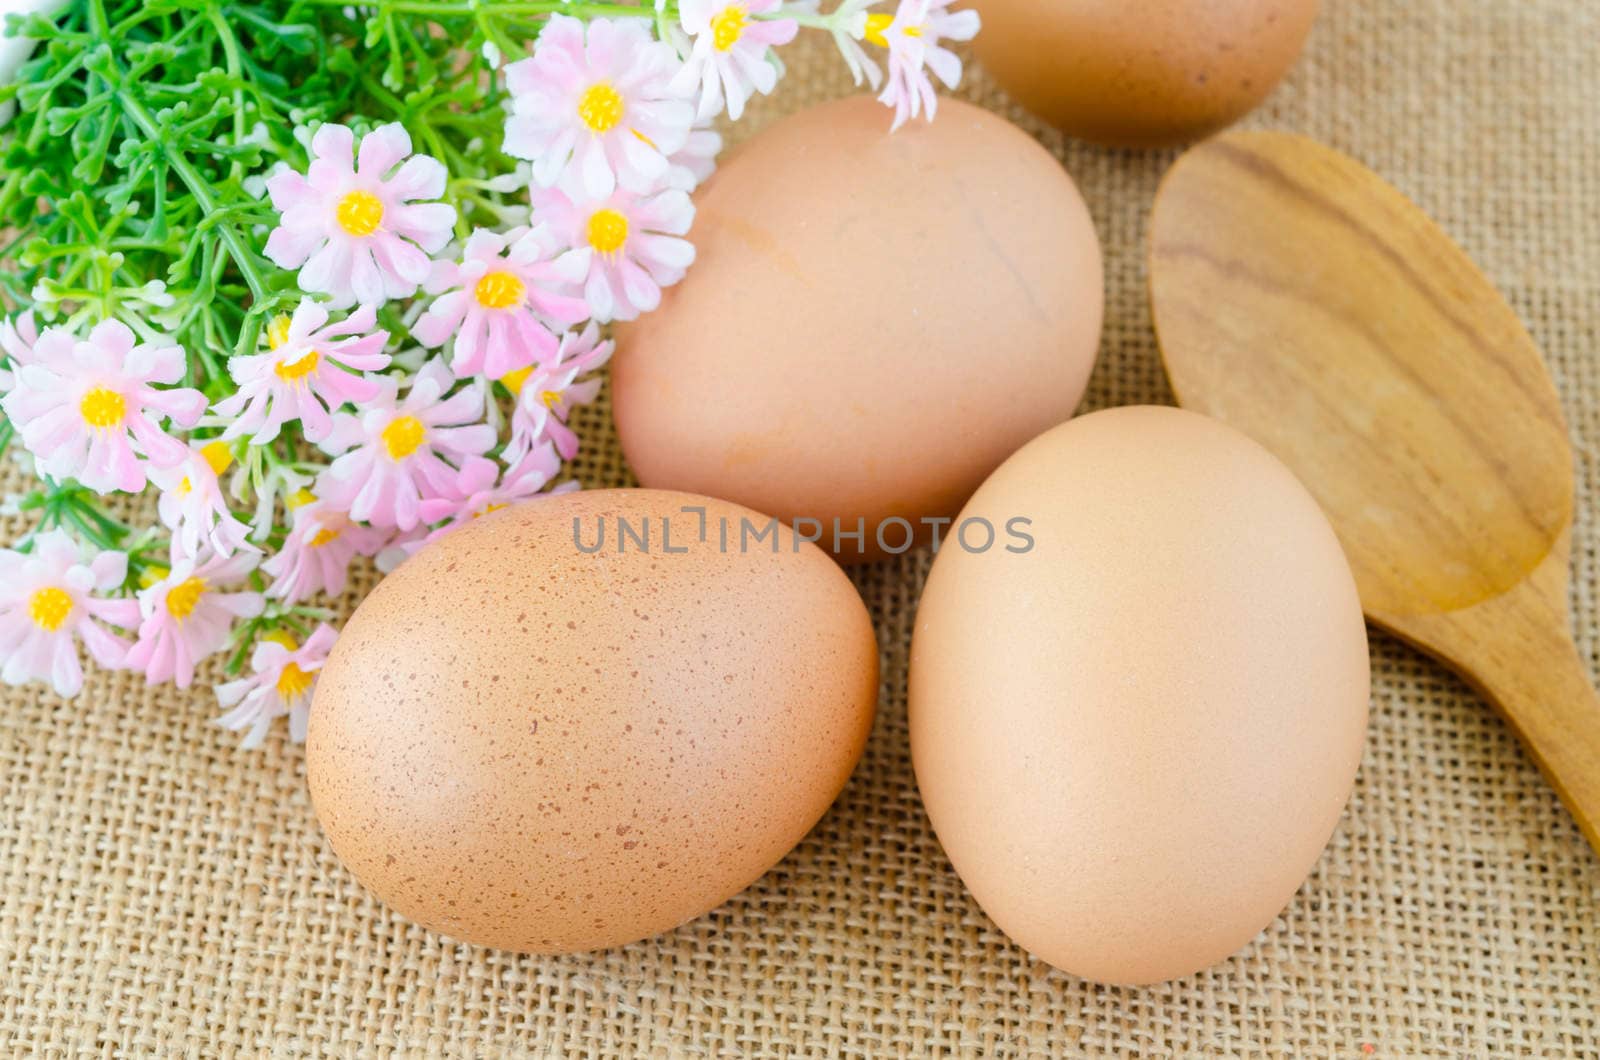 Eggs and wooden spoon with flower on sack background.